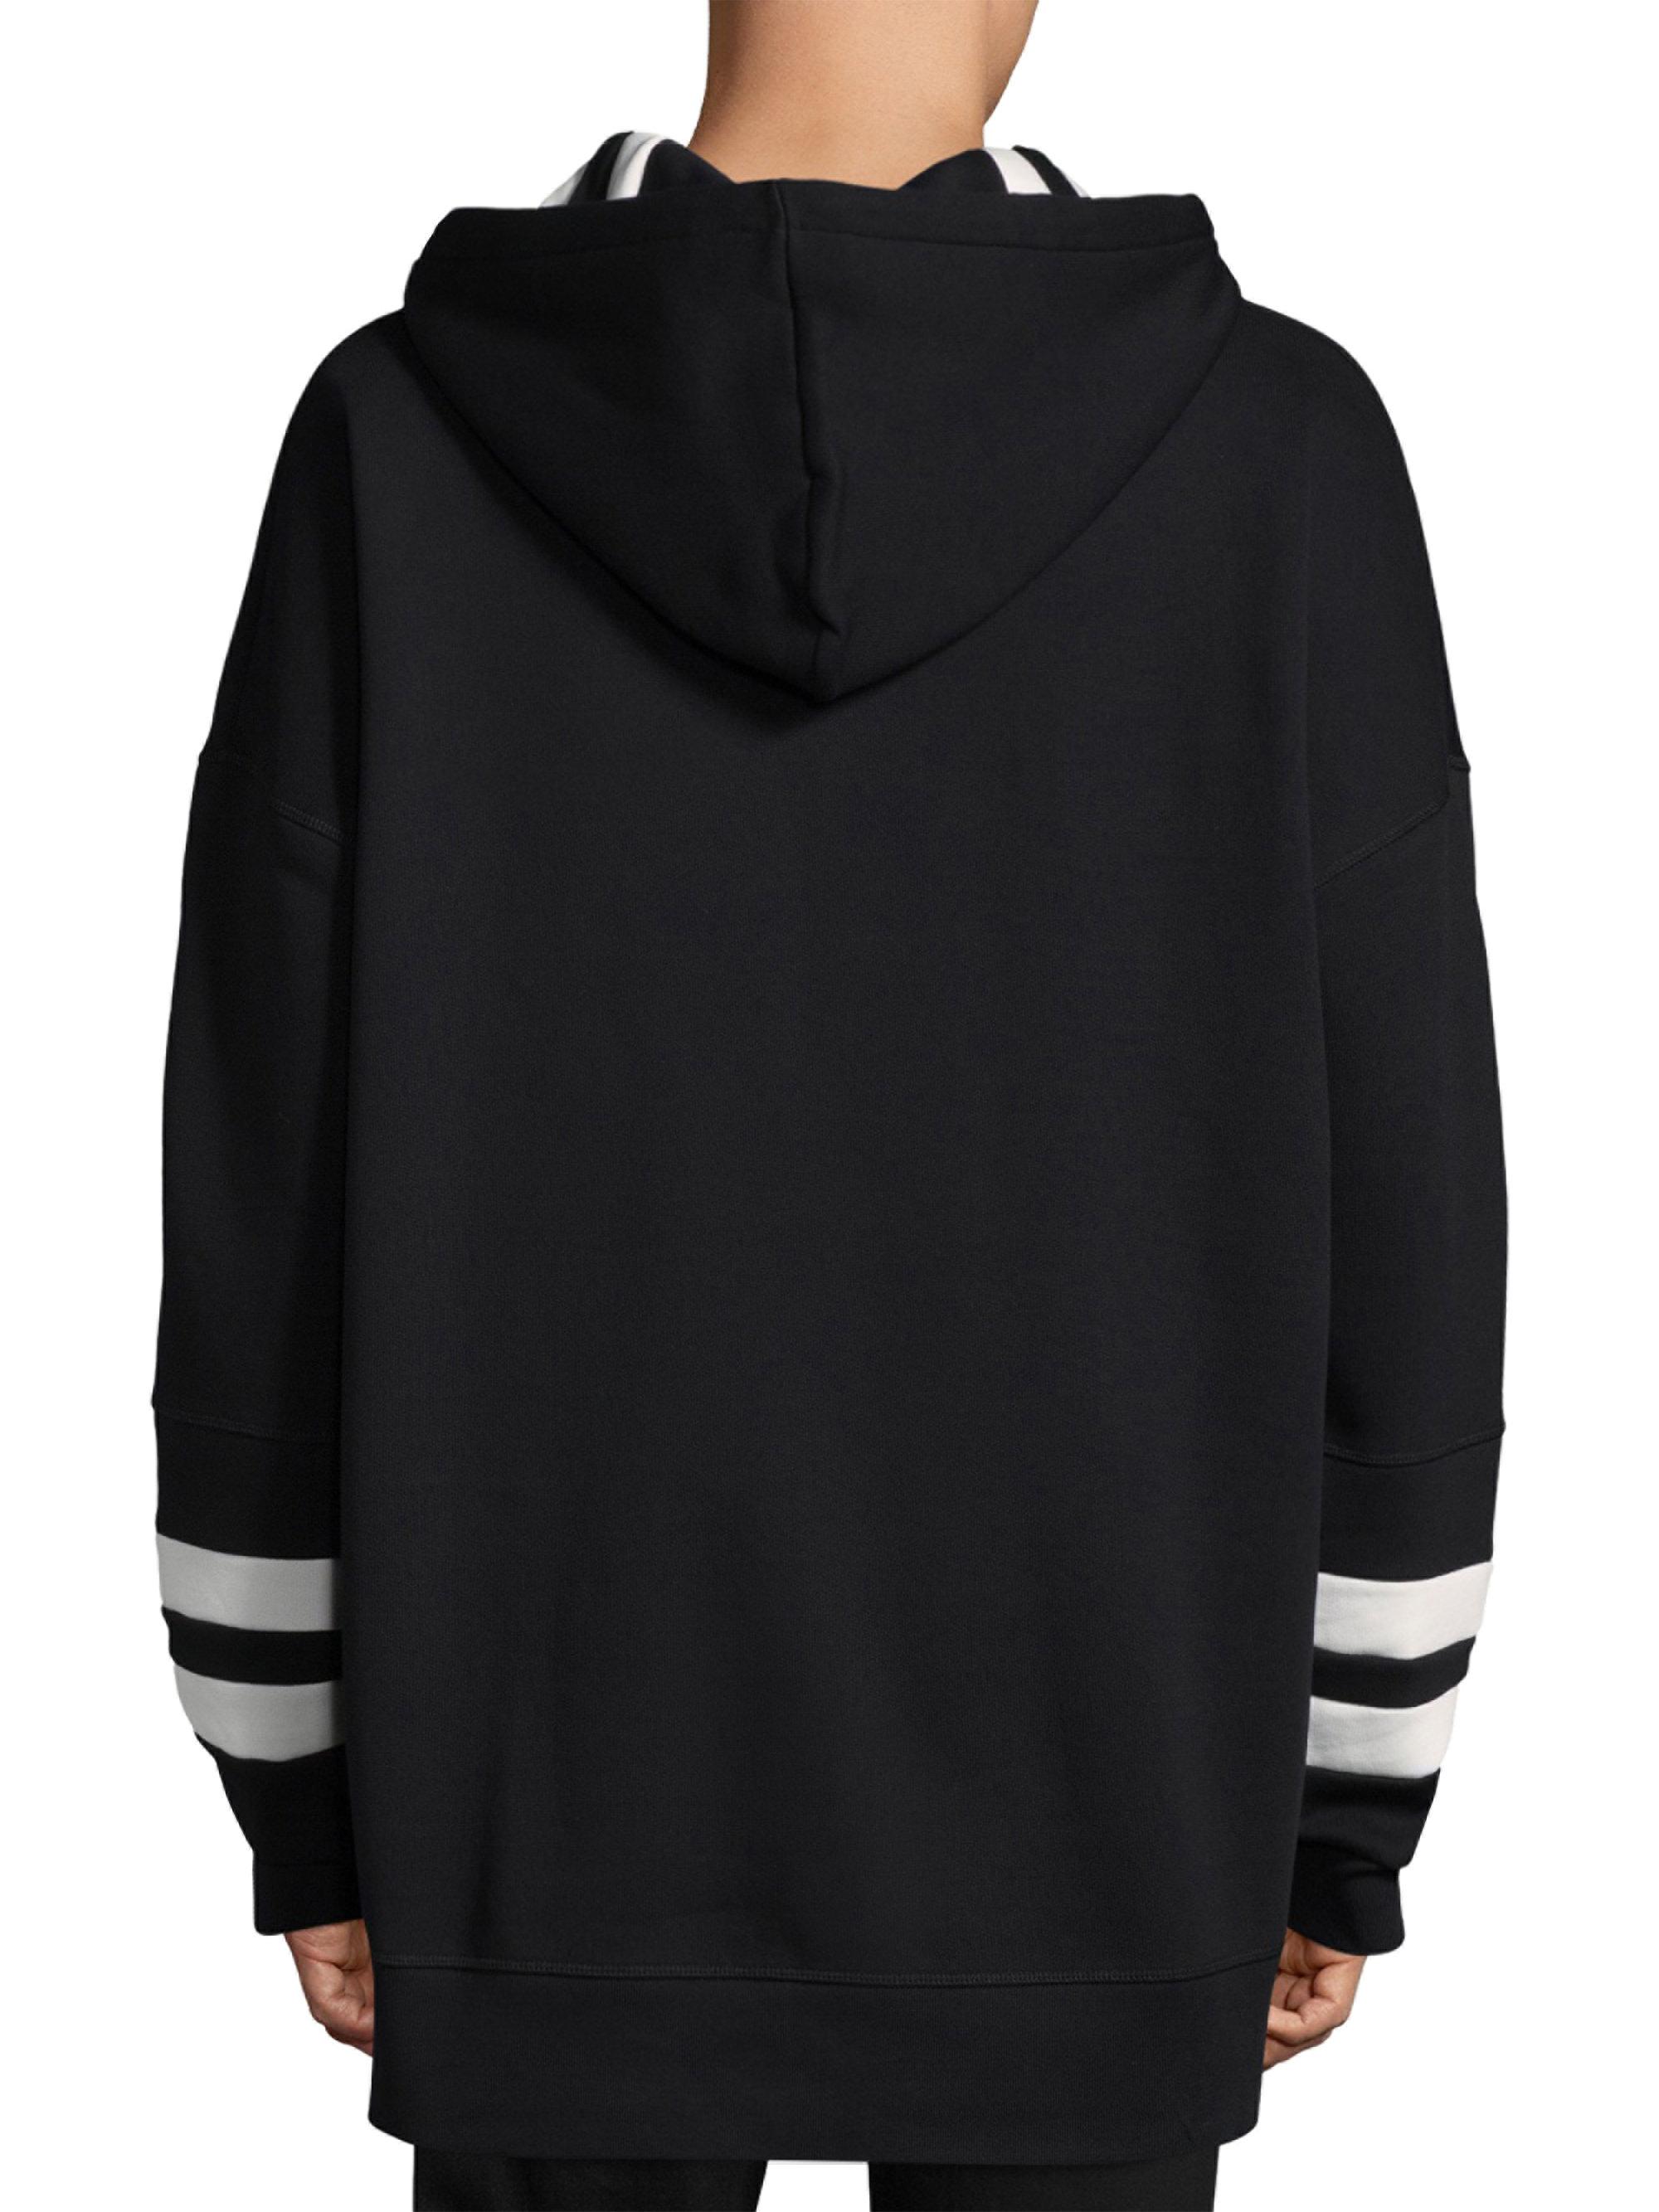 Burberry Cotton Raynor Striped Cuff Hoodie in Black for Men - Lyst